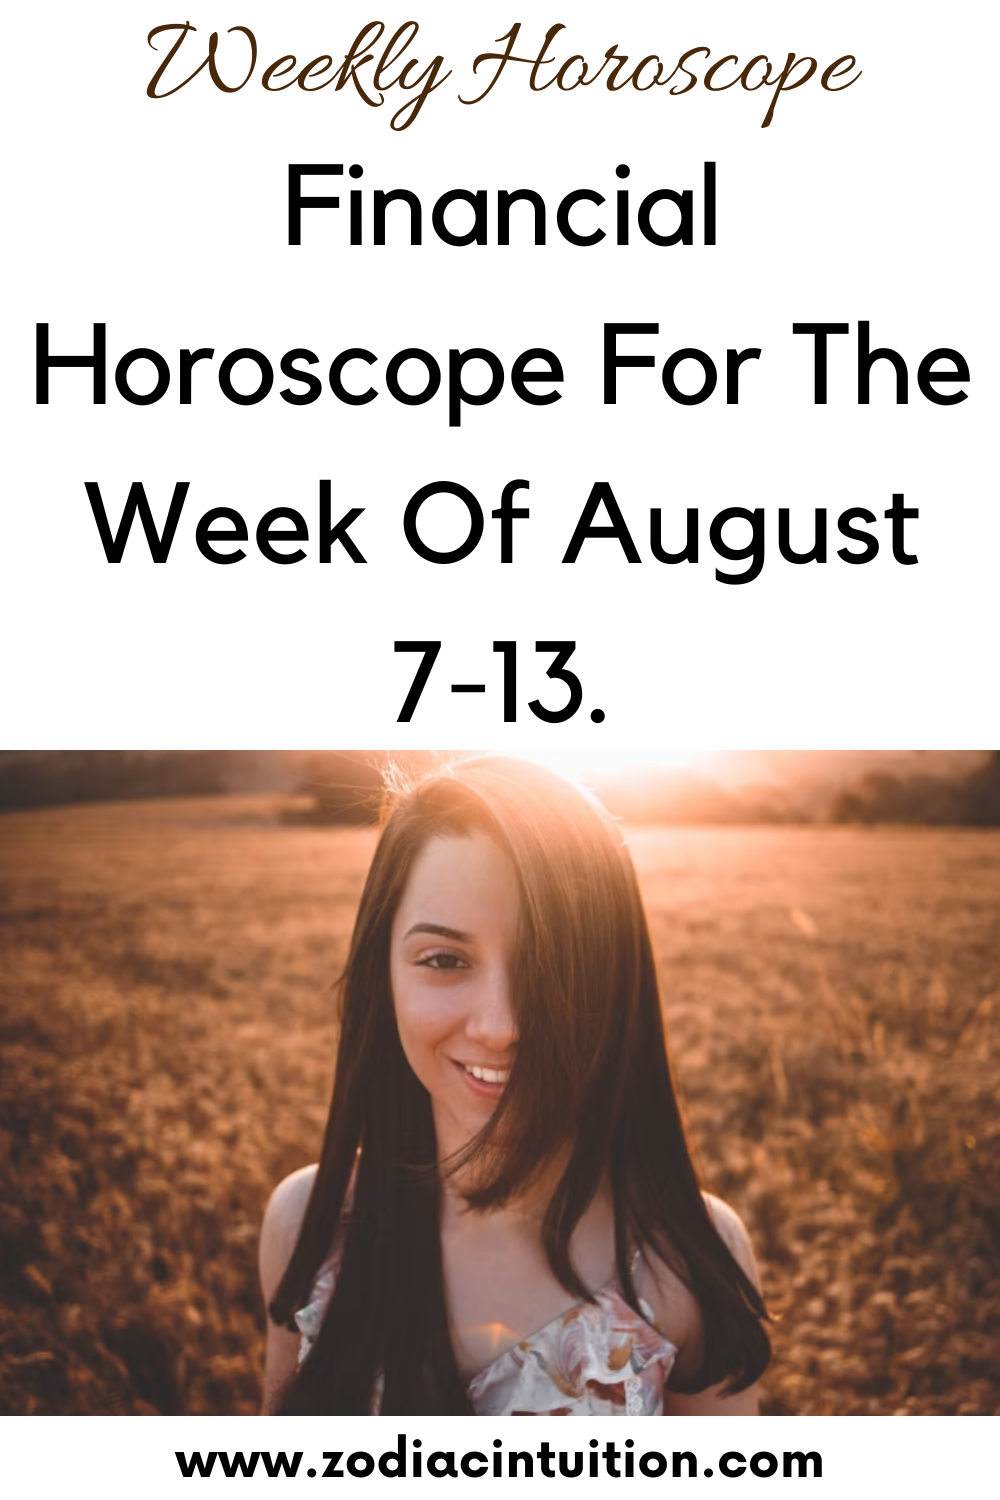 Weekly Financial Horoscope For The Week Of August 7-13.